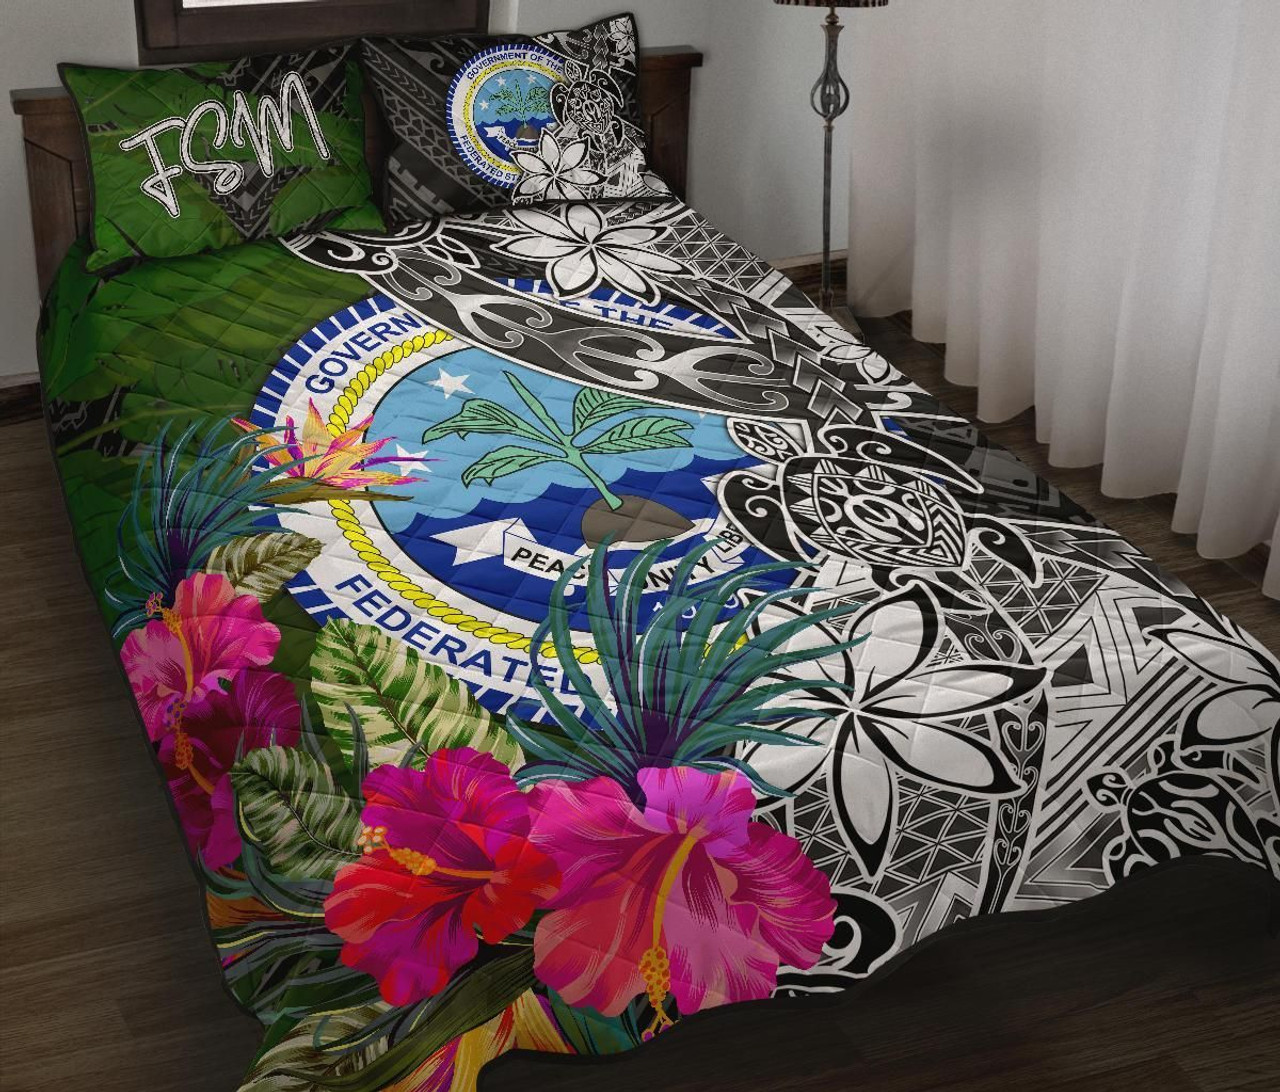 Federated States of Micronesia Quilt Bed Set - Turtle Plumeria Banana Leaf 1